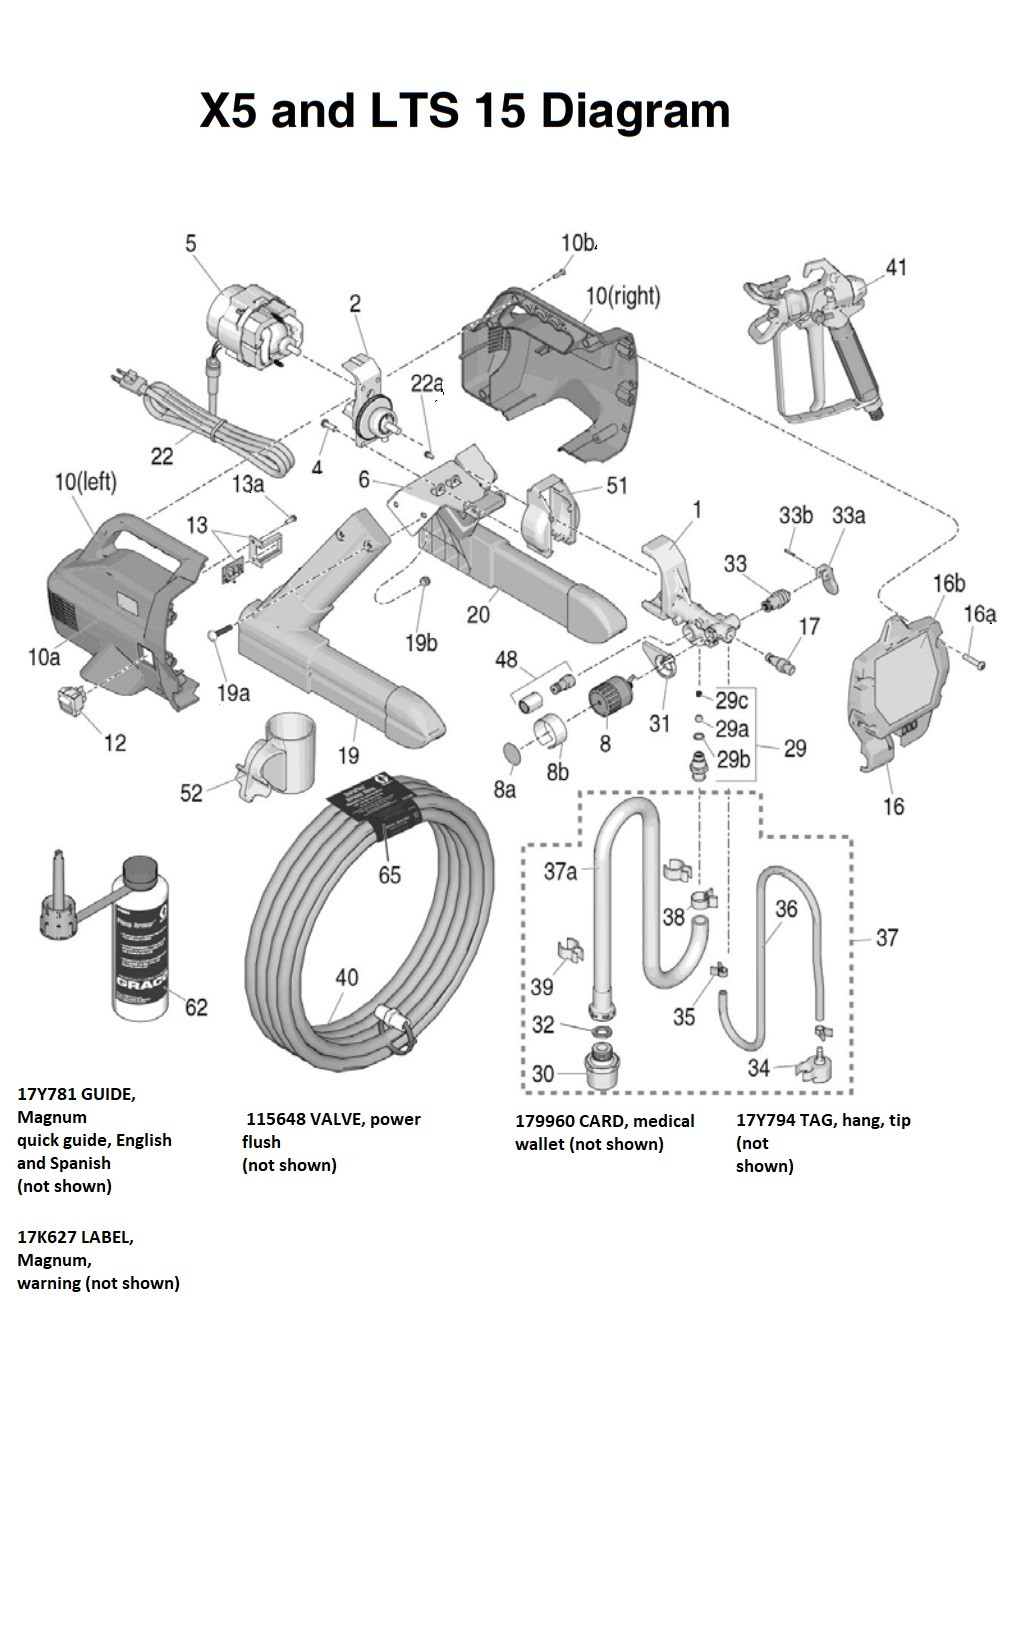 Graco X5 and LTS 15 Diagram and Parts